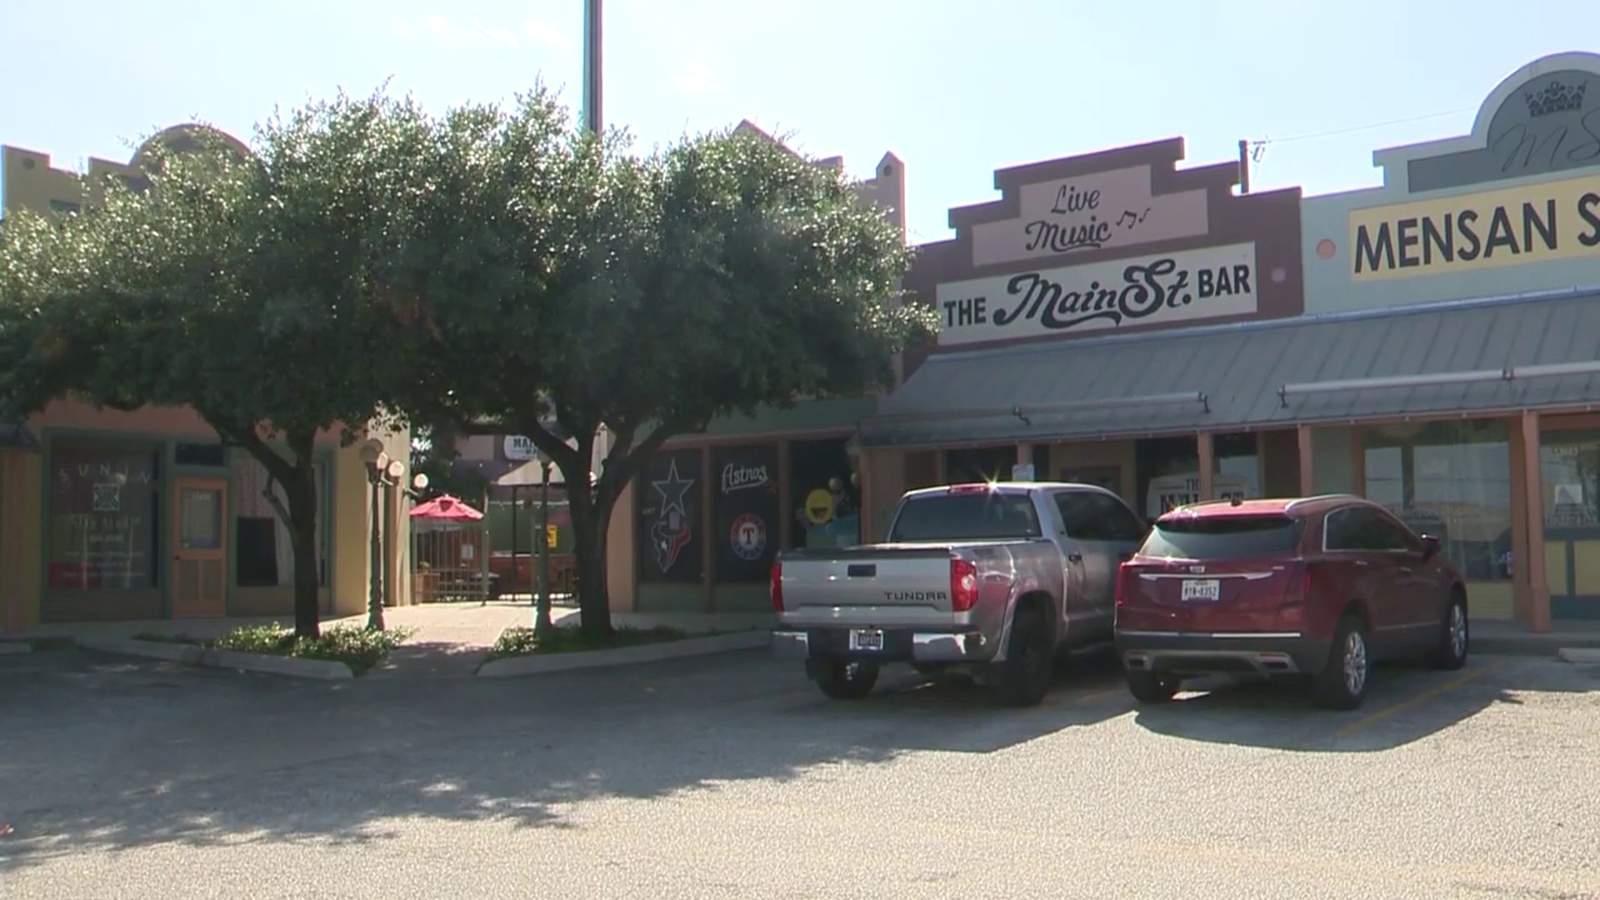 San Antonio bars reinvent themselves with plans to reopen